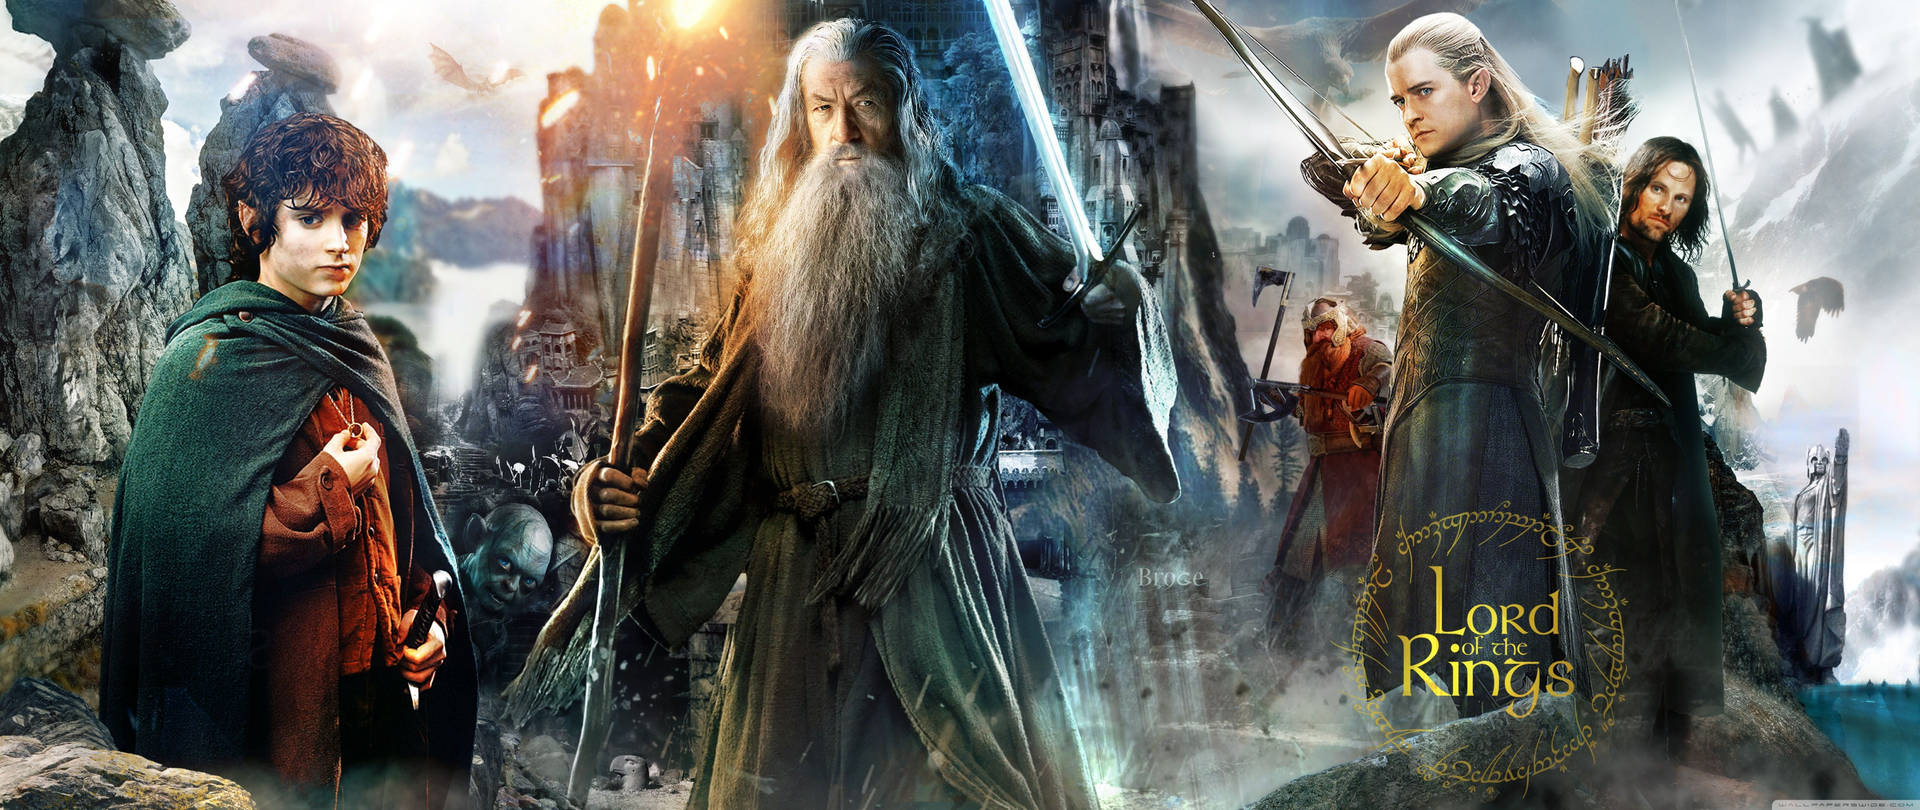 The Lord Of The Rings Movie Poster Background